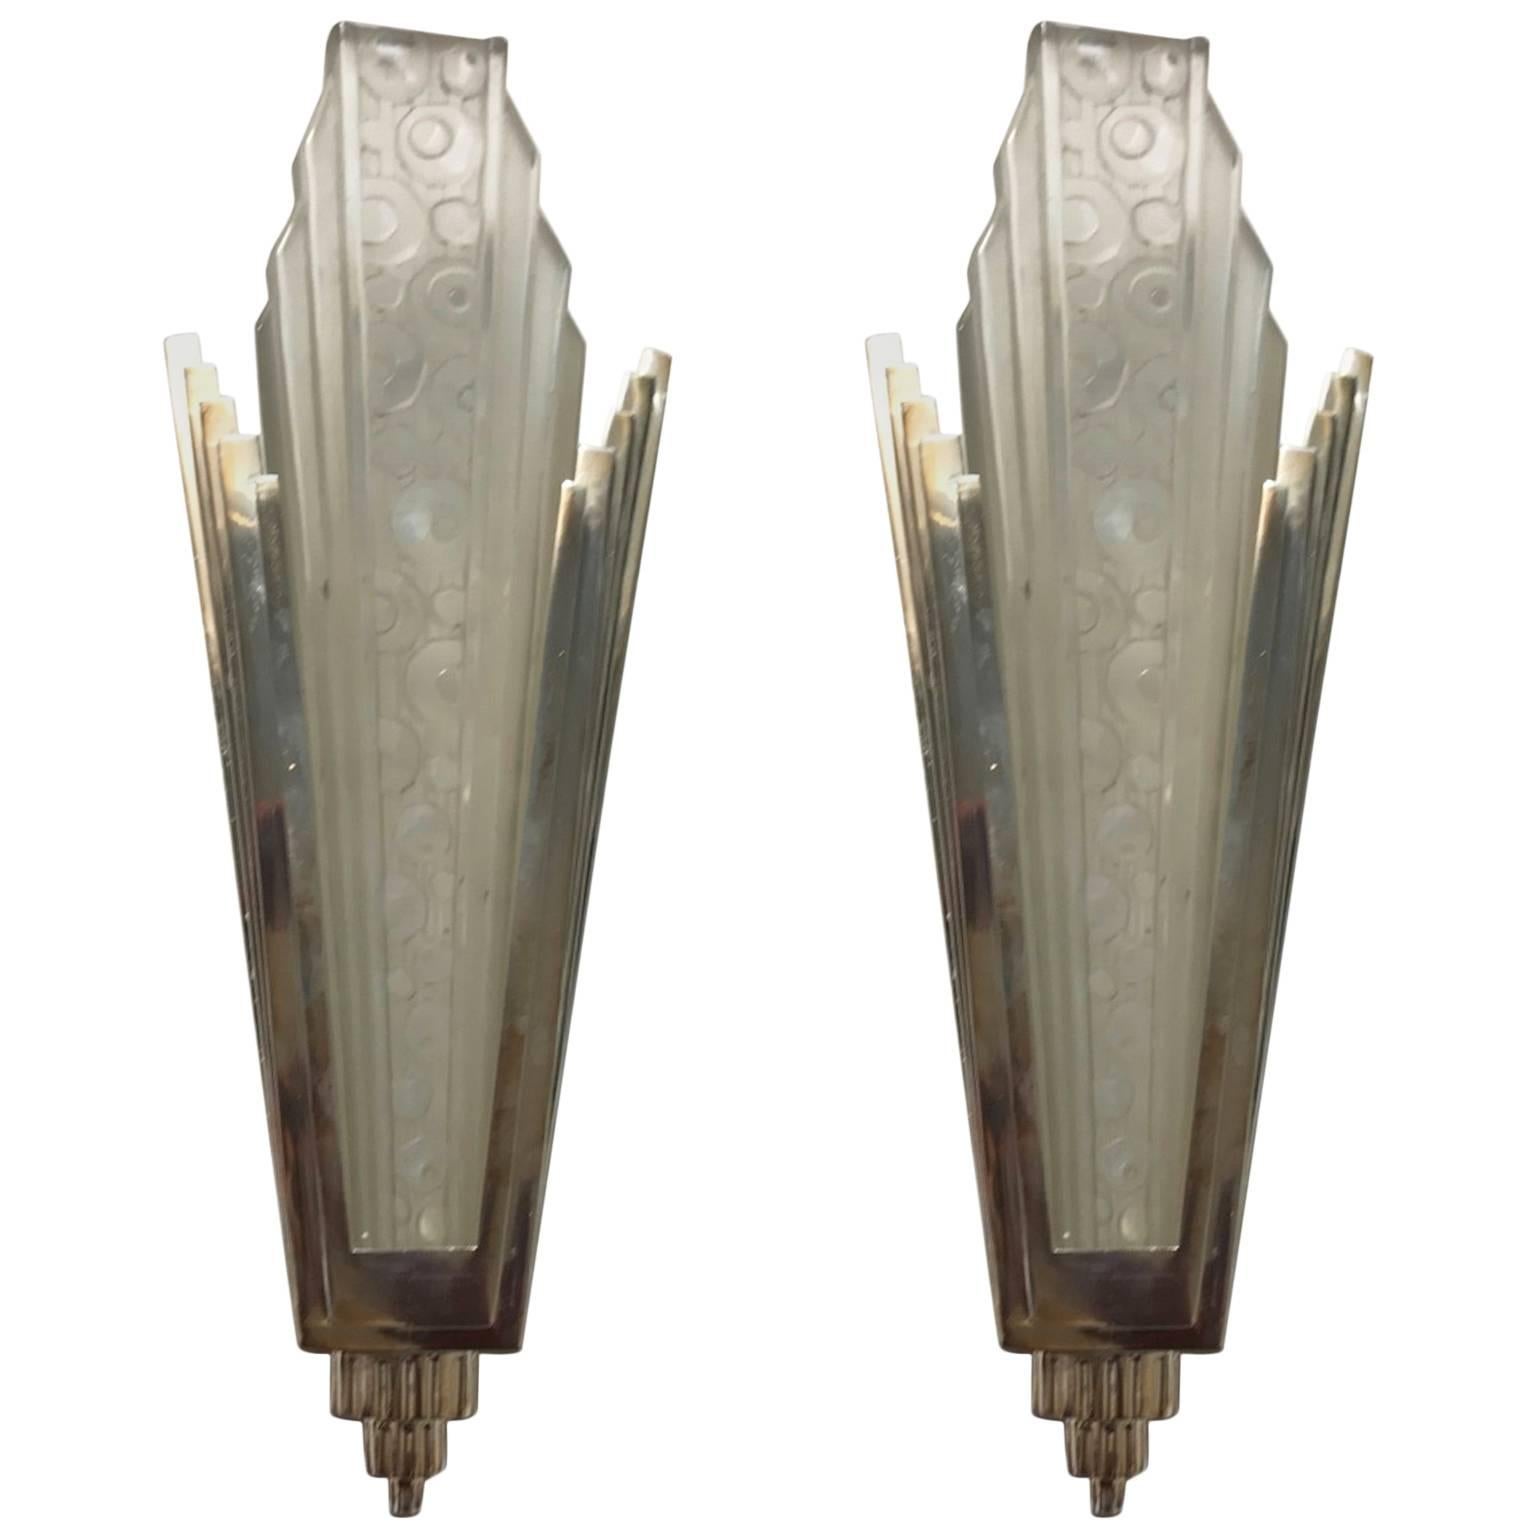 Pair of French Art Deco Sconces with Geometric and Skyscraper Motif